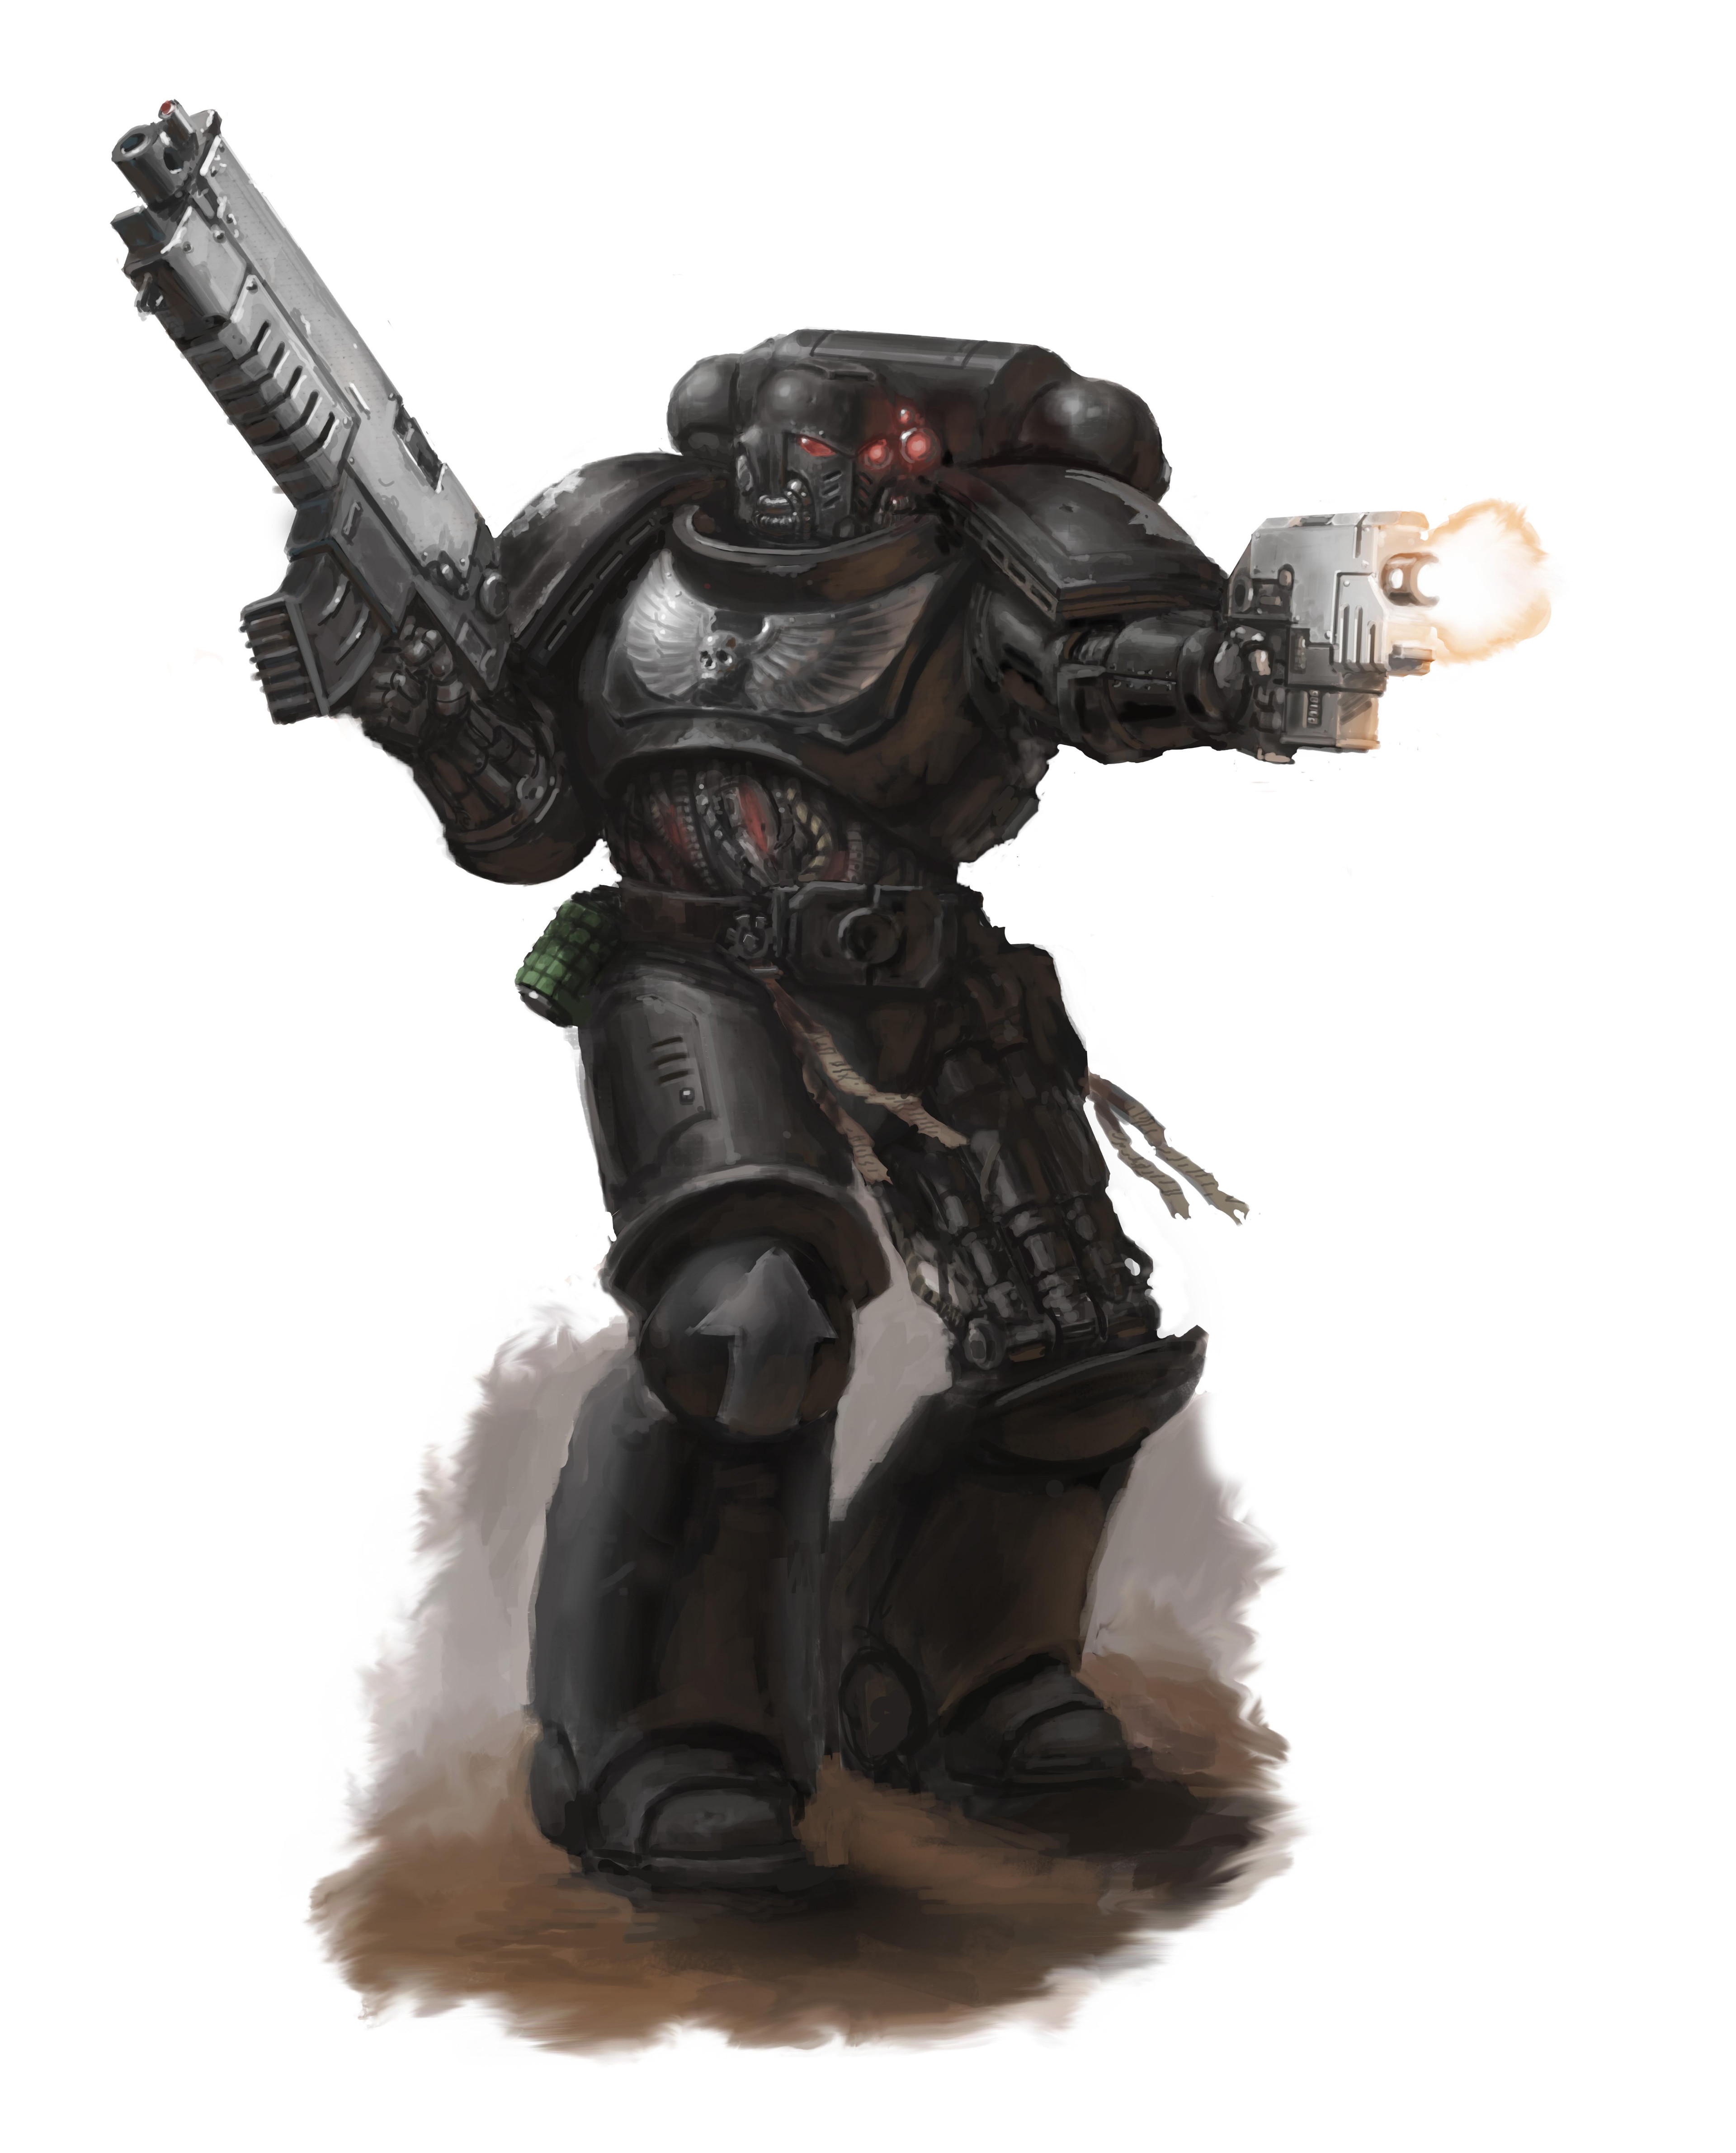 Vignette from the Iron Hands section of the Space Marine codex (not sure which one, I think 8th edition)